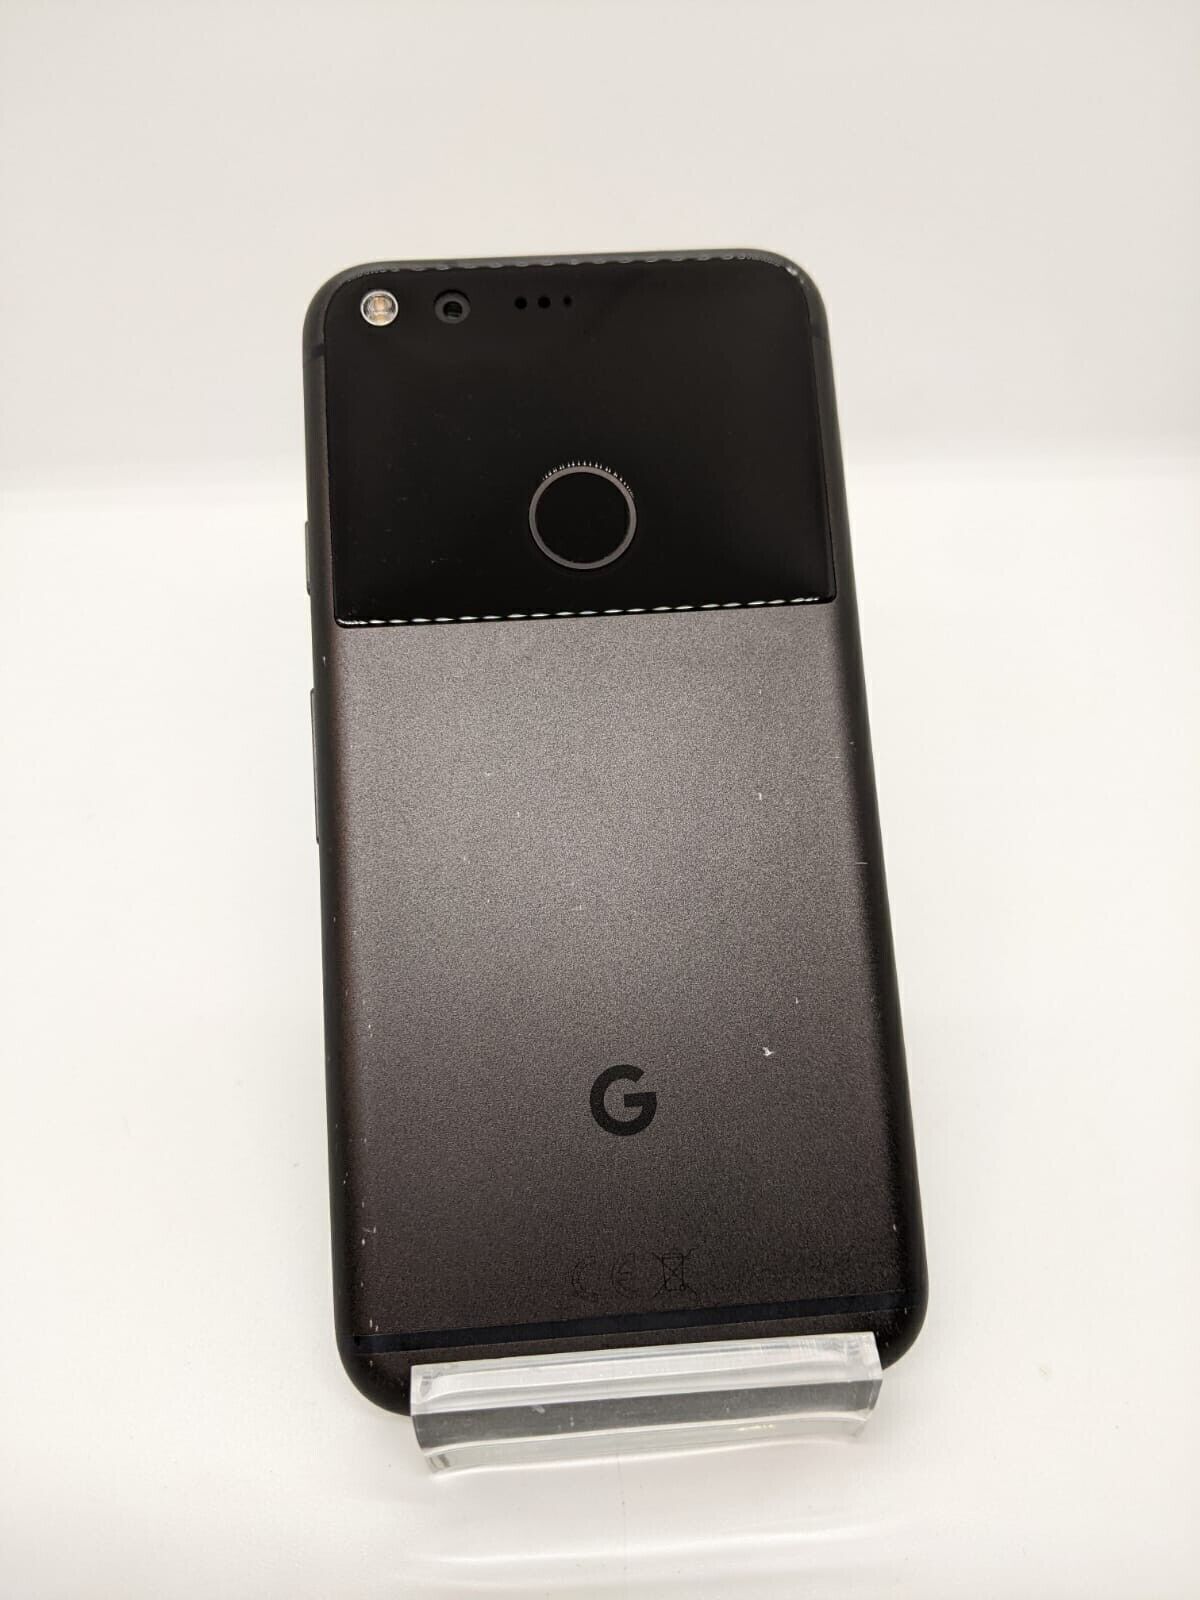 Google Pixel 32GB Unlocked Android 4G LTE Smartphone G-2PW4100 FOR PARTS WORKING